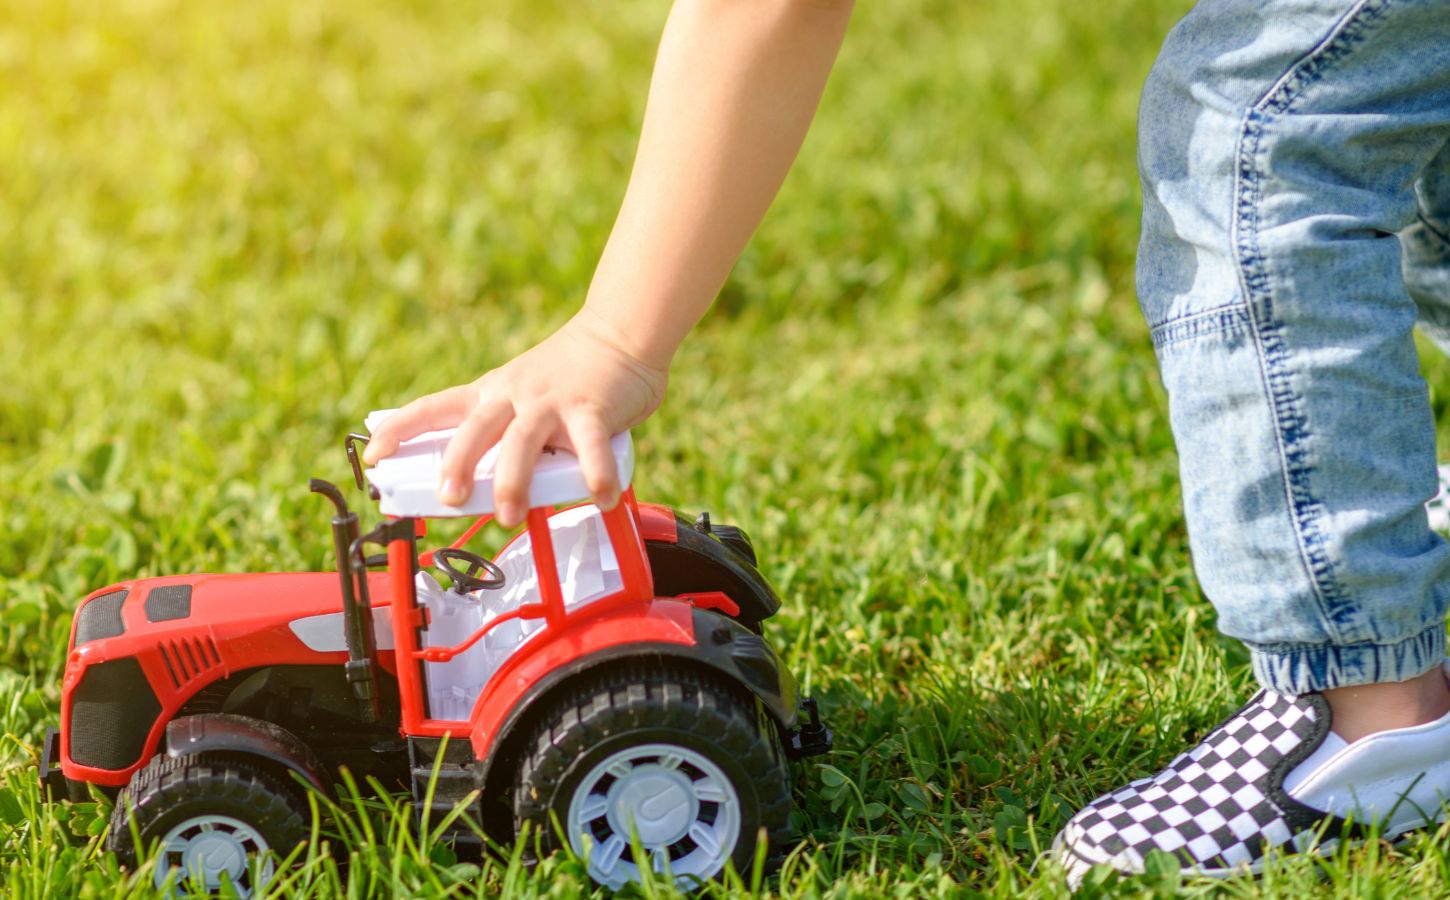 A child playing with a red toy car made from brightly colored plastic, which experts are urging retailers to move away from over microplastics fears